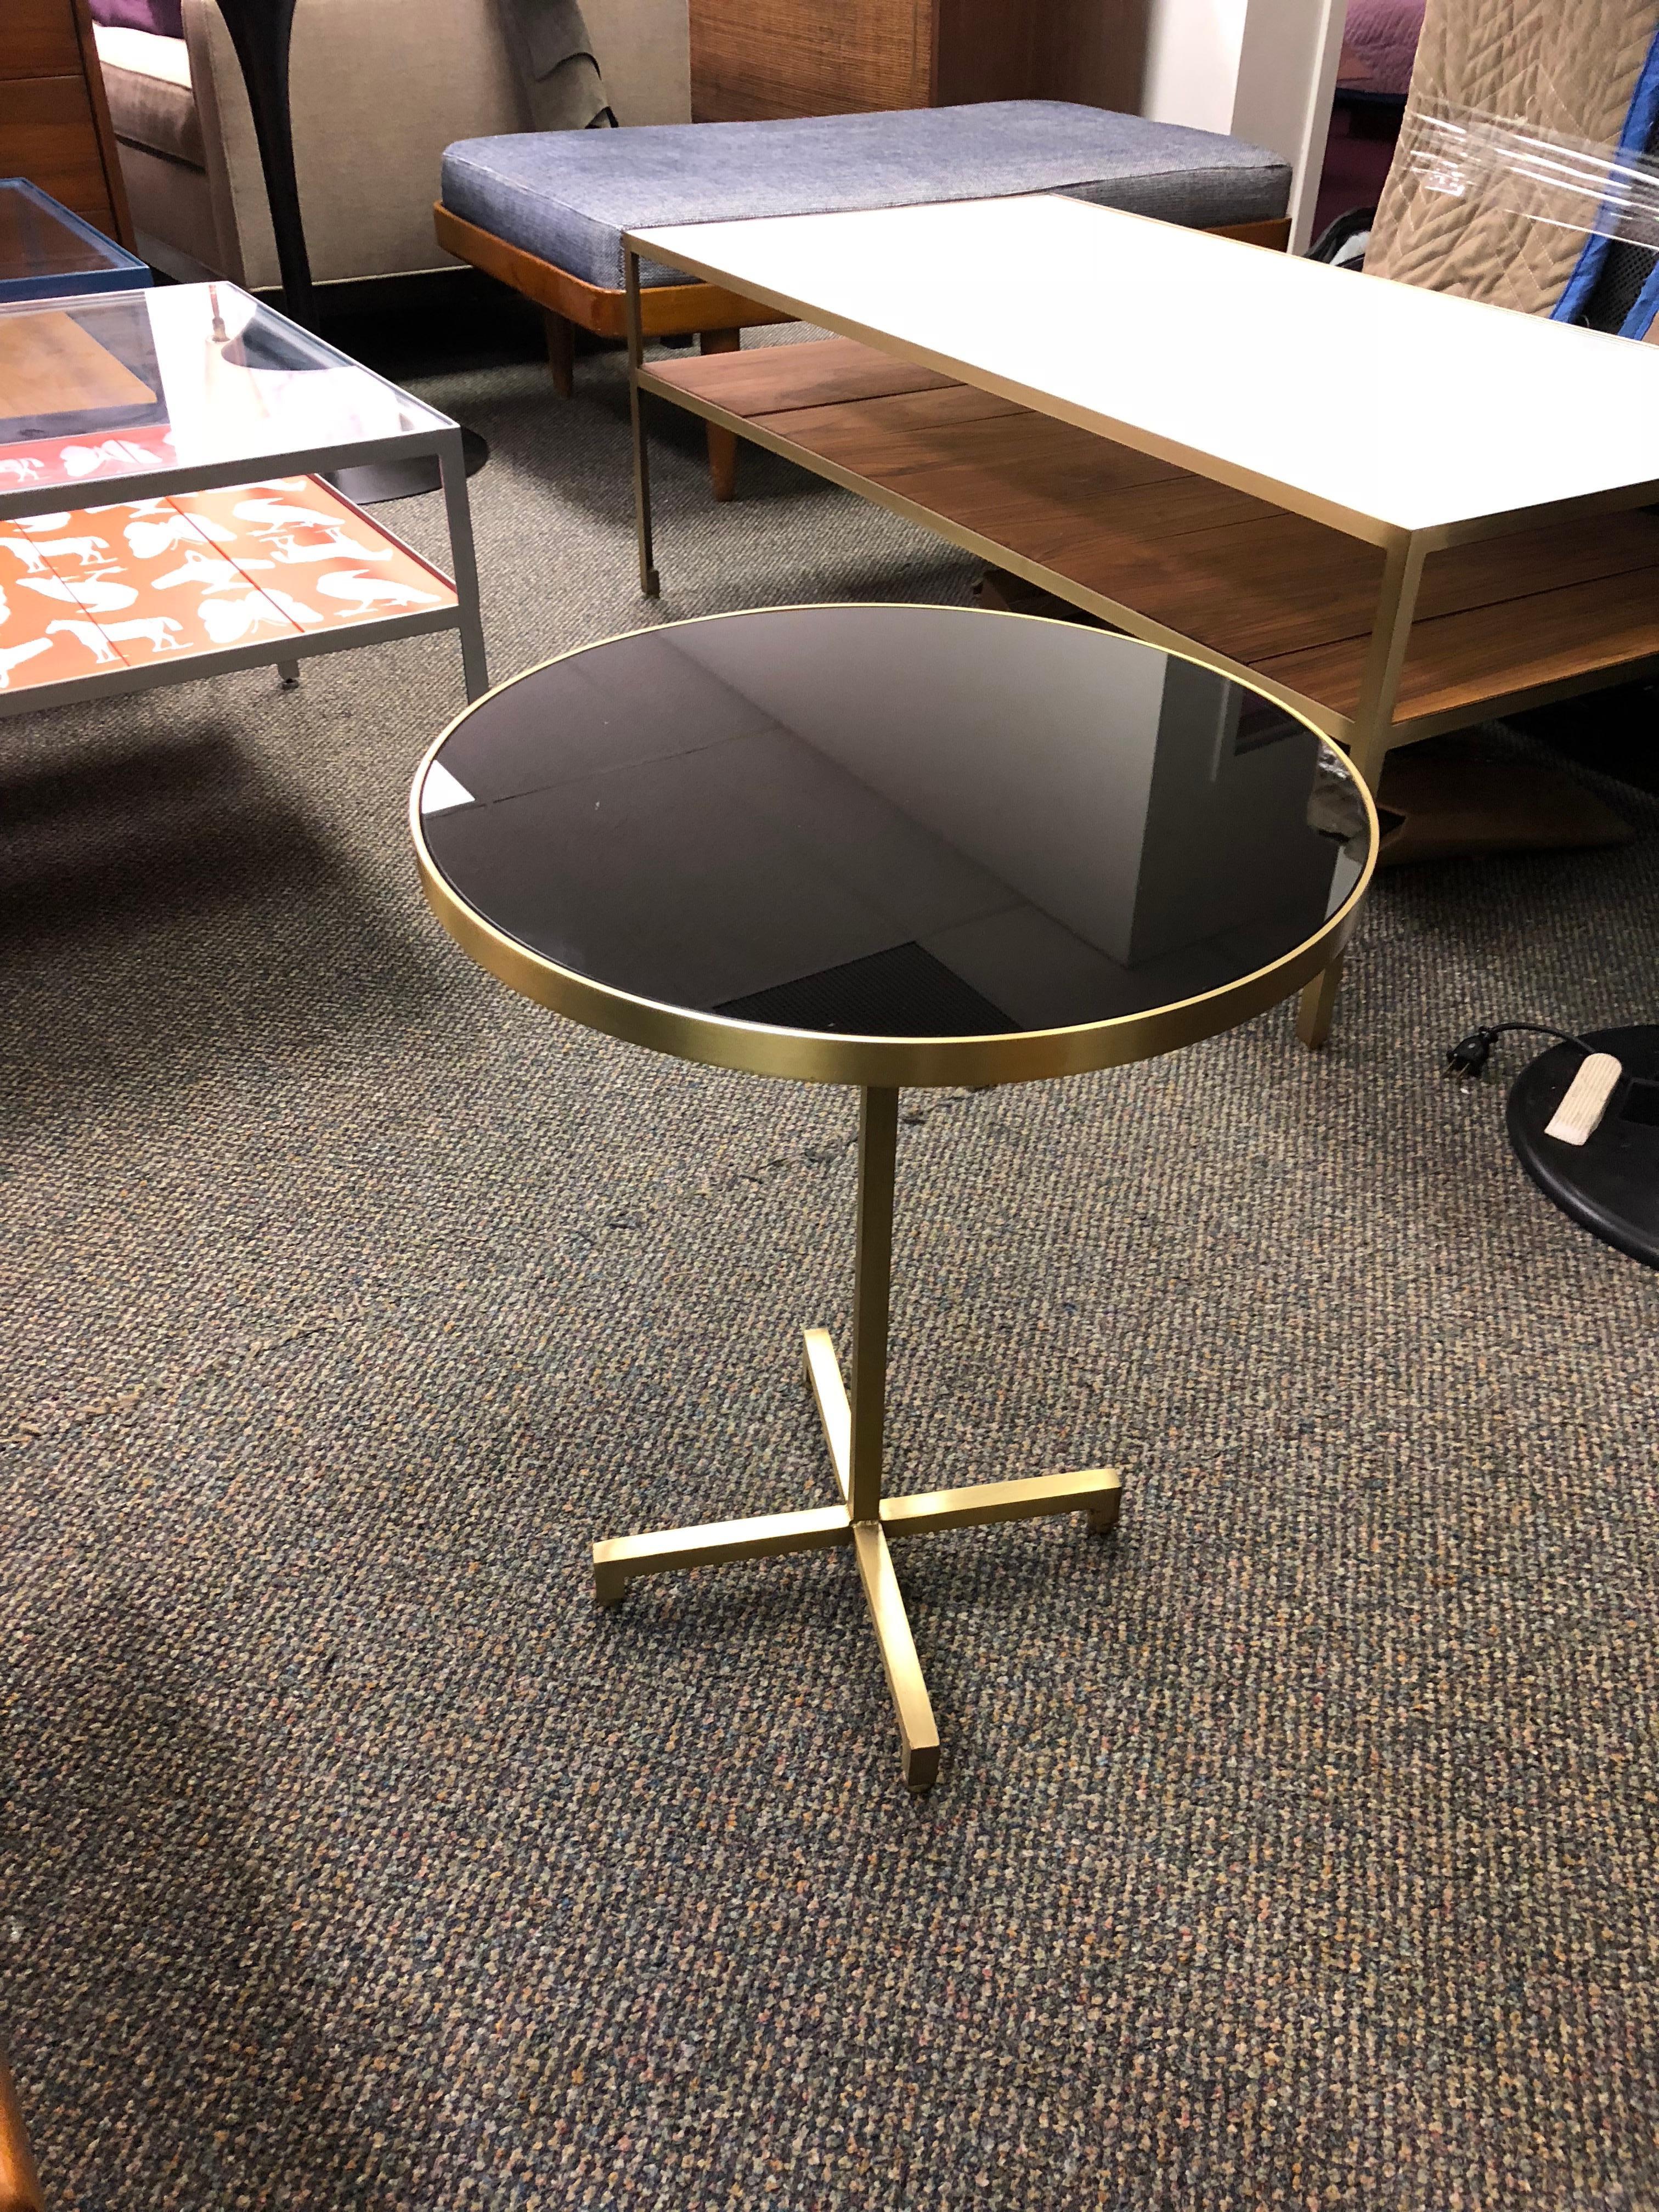 Re: 205 brass side table with black mirror glass. 